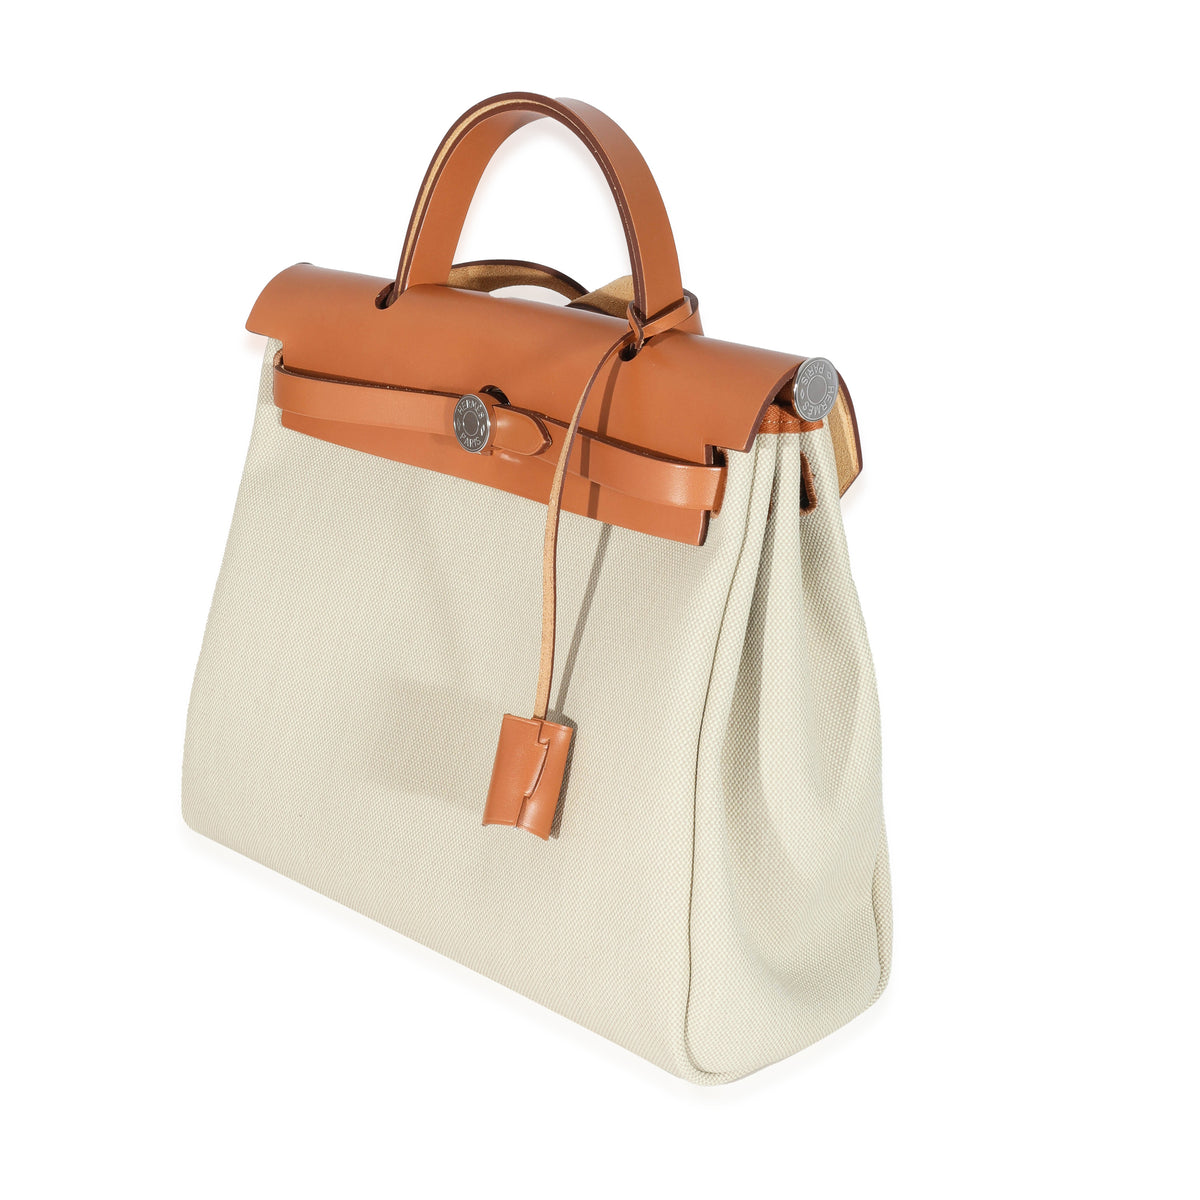 Herbag Zip 31 Orange Canvas and Tan Leather PHW